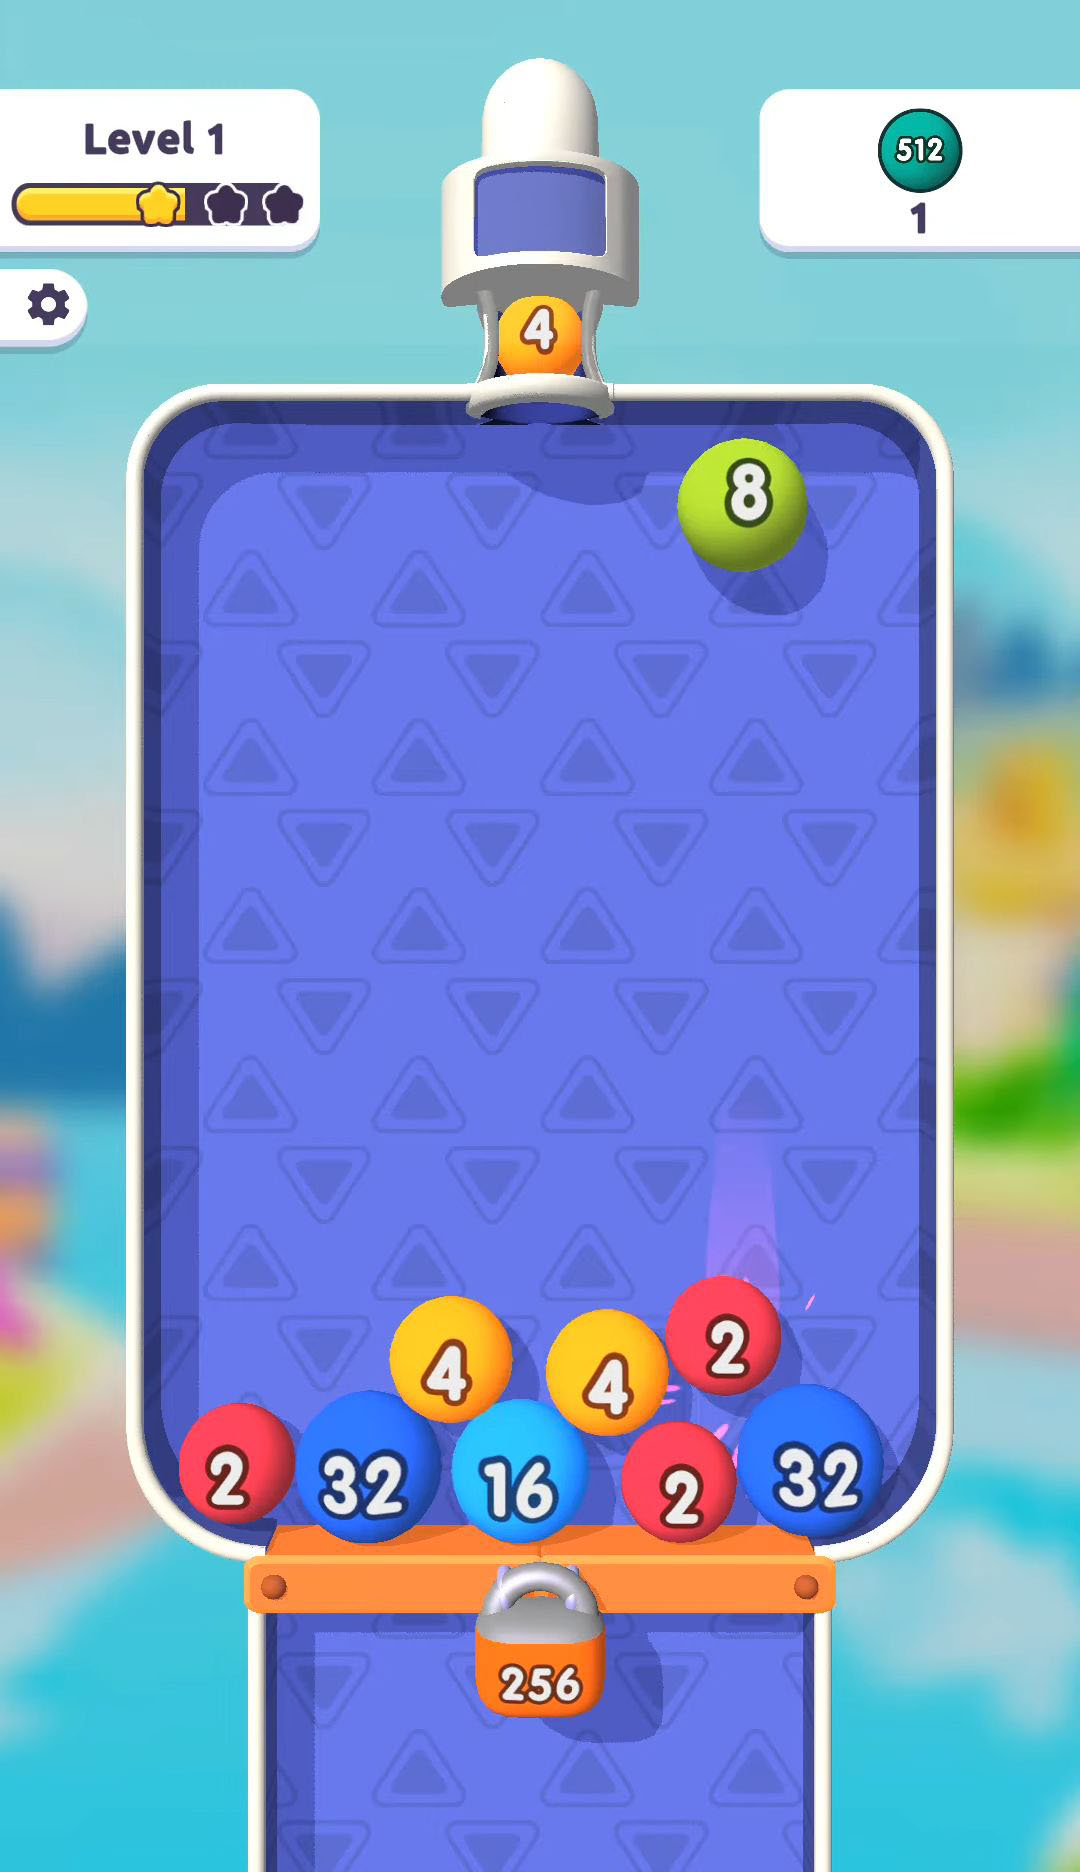 Bubble Buster 2048 na App Store